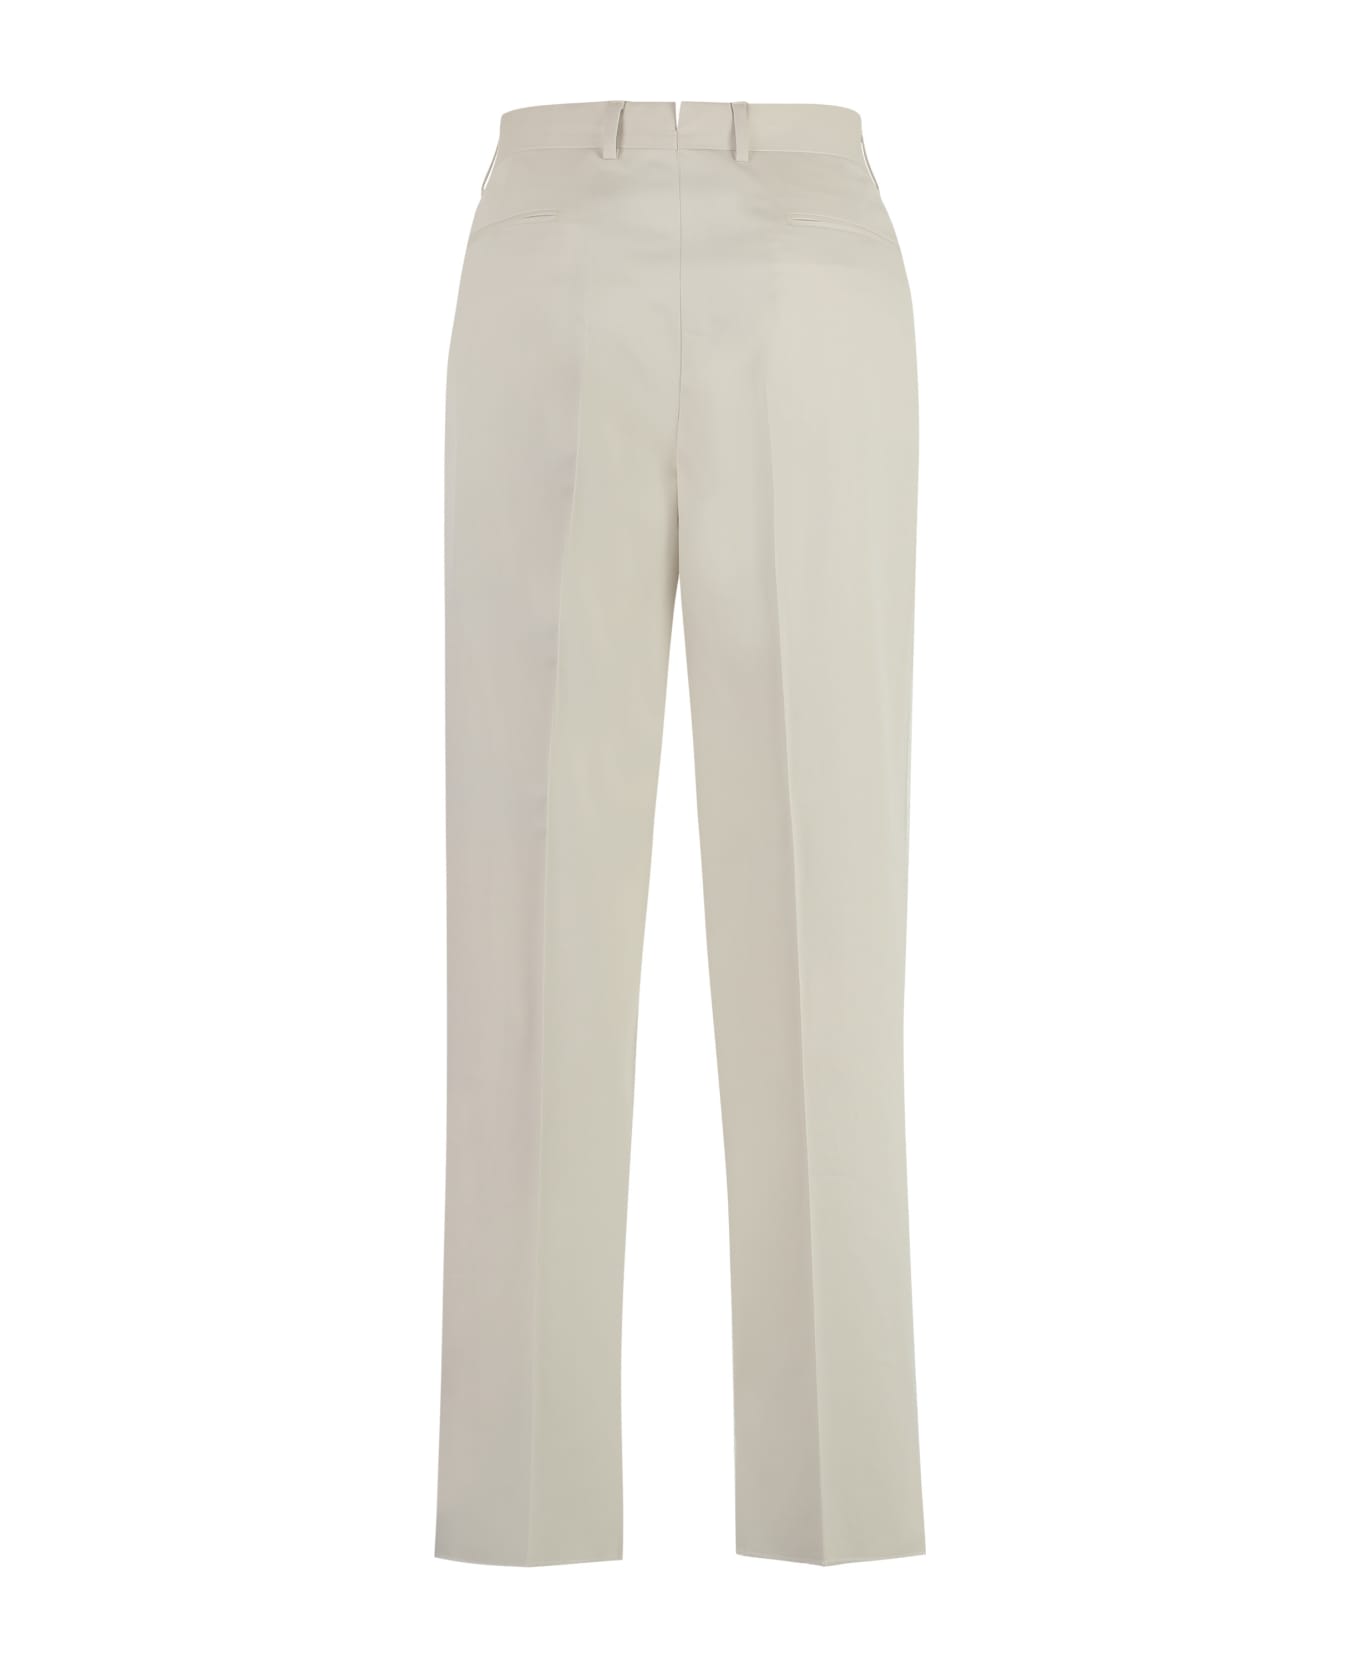 Zegna Stretch Cotton Chino Trousers - Ivory ボトムス